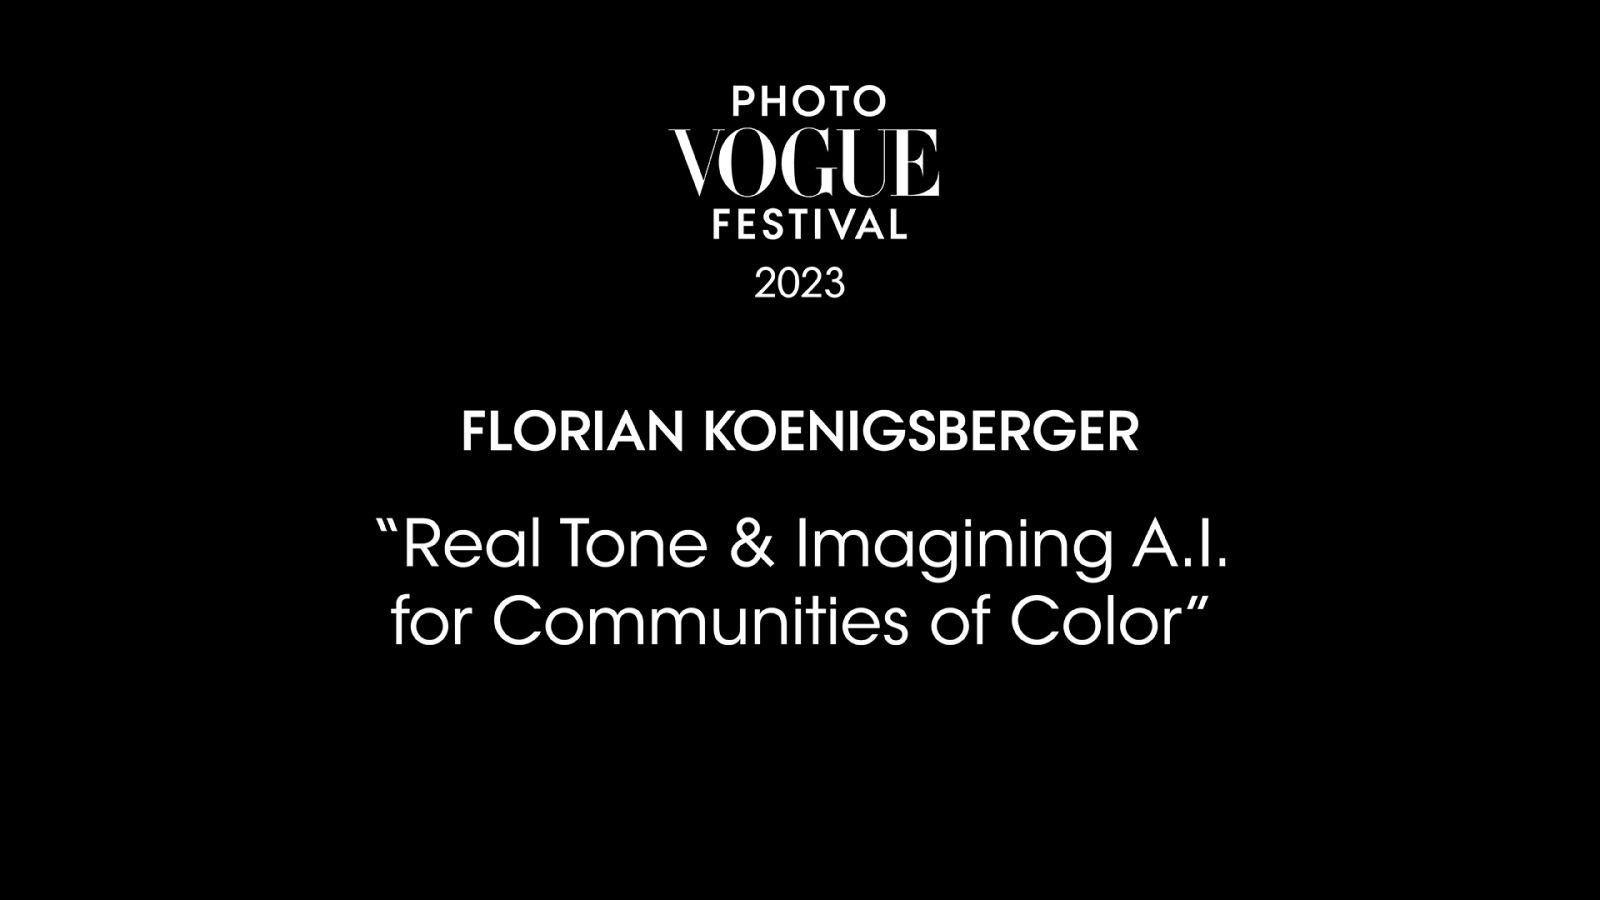 Real Tone & Imagining A.I. for Communities of Color | PhotoVogue Festival 2023: What Makes Us Human? Image in the Age of A.I.